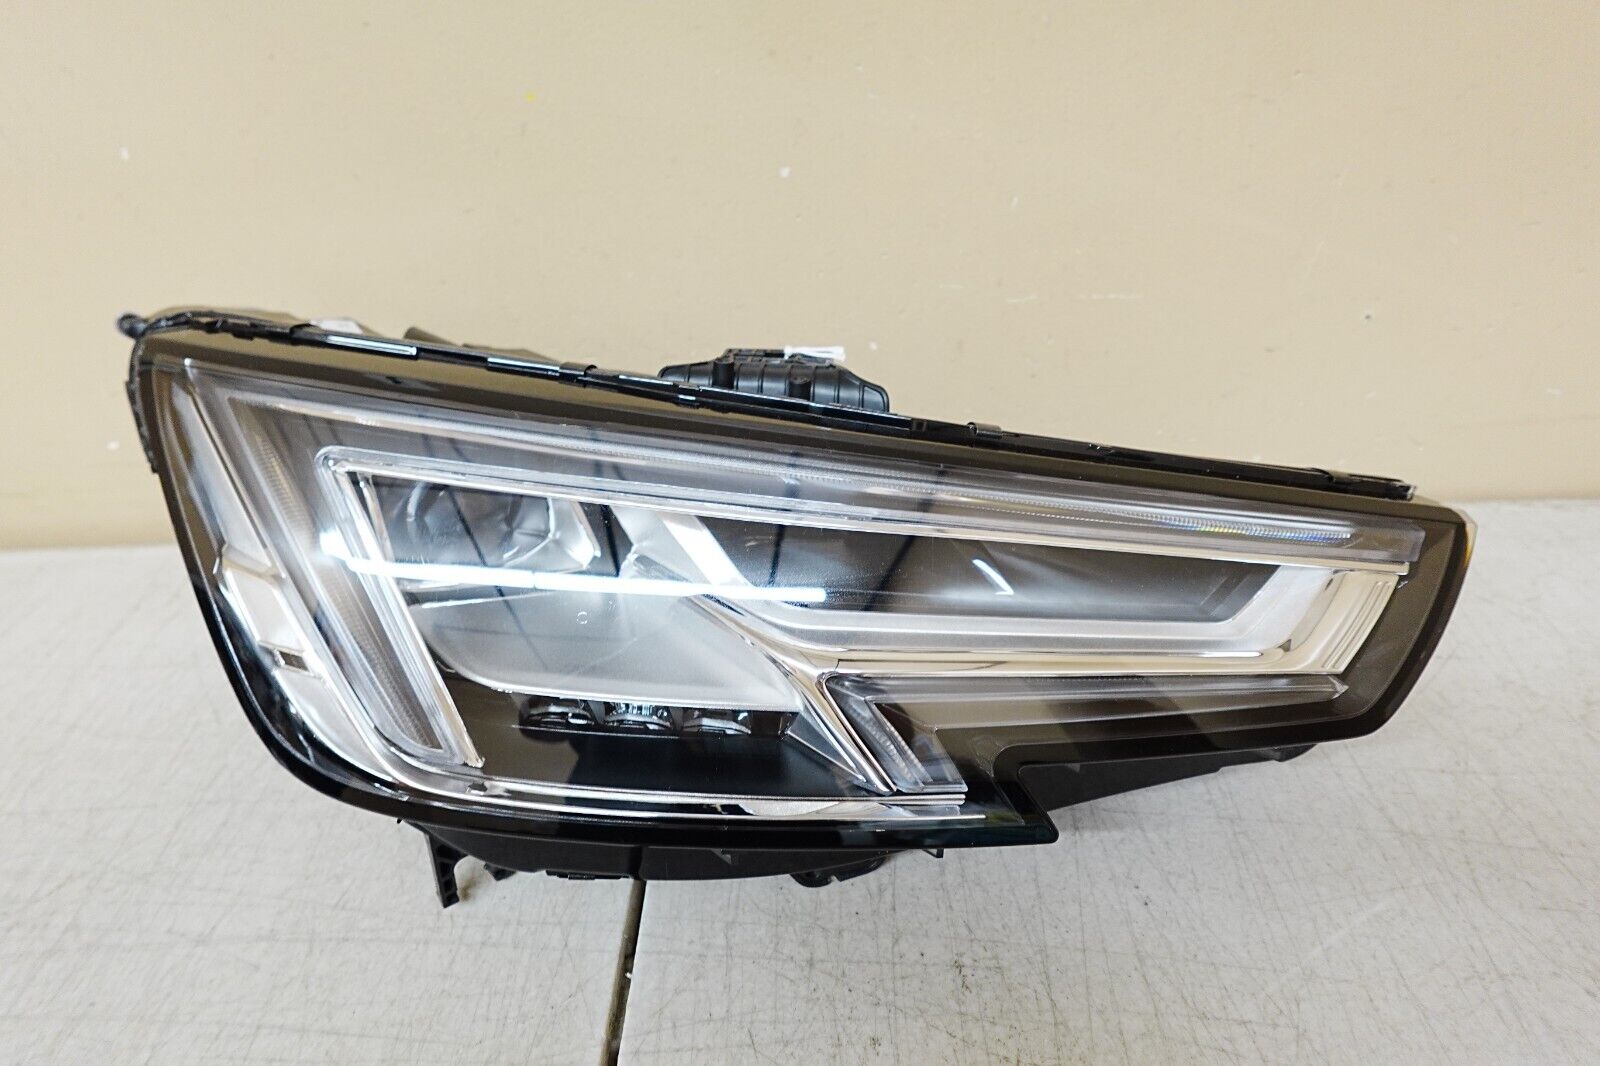 2017-2018-2019 AUDI A4/S4 RIGHT HEADLIGHT AFTERMARKET XENON HID HOUSING ONLY